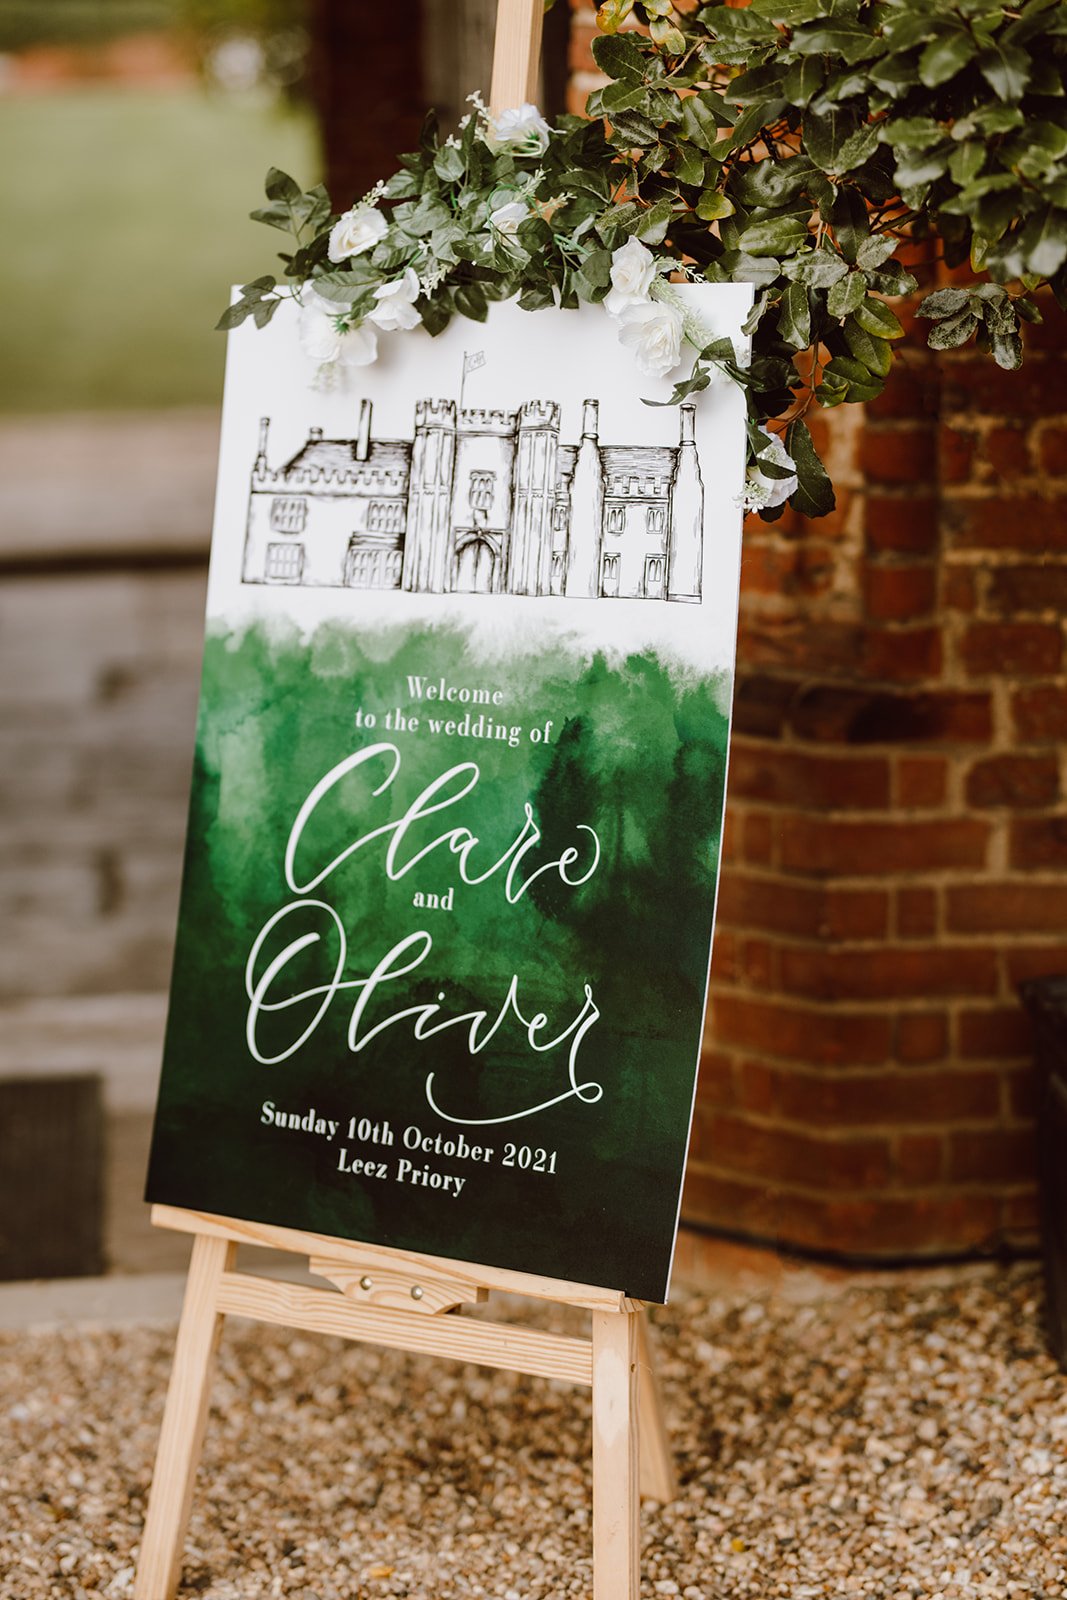 Leez priory wedding - emerald green wedding stationery - venue illustration and calligraphy wedding welcome sign by the amyverse green watercolour wedding stationery.jpg